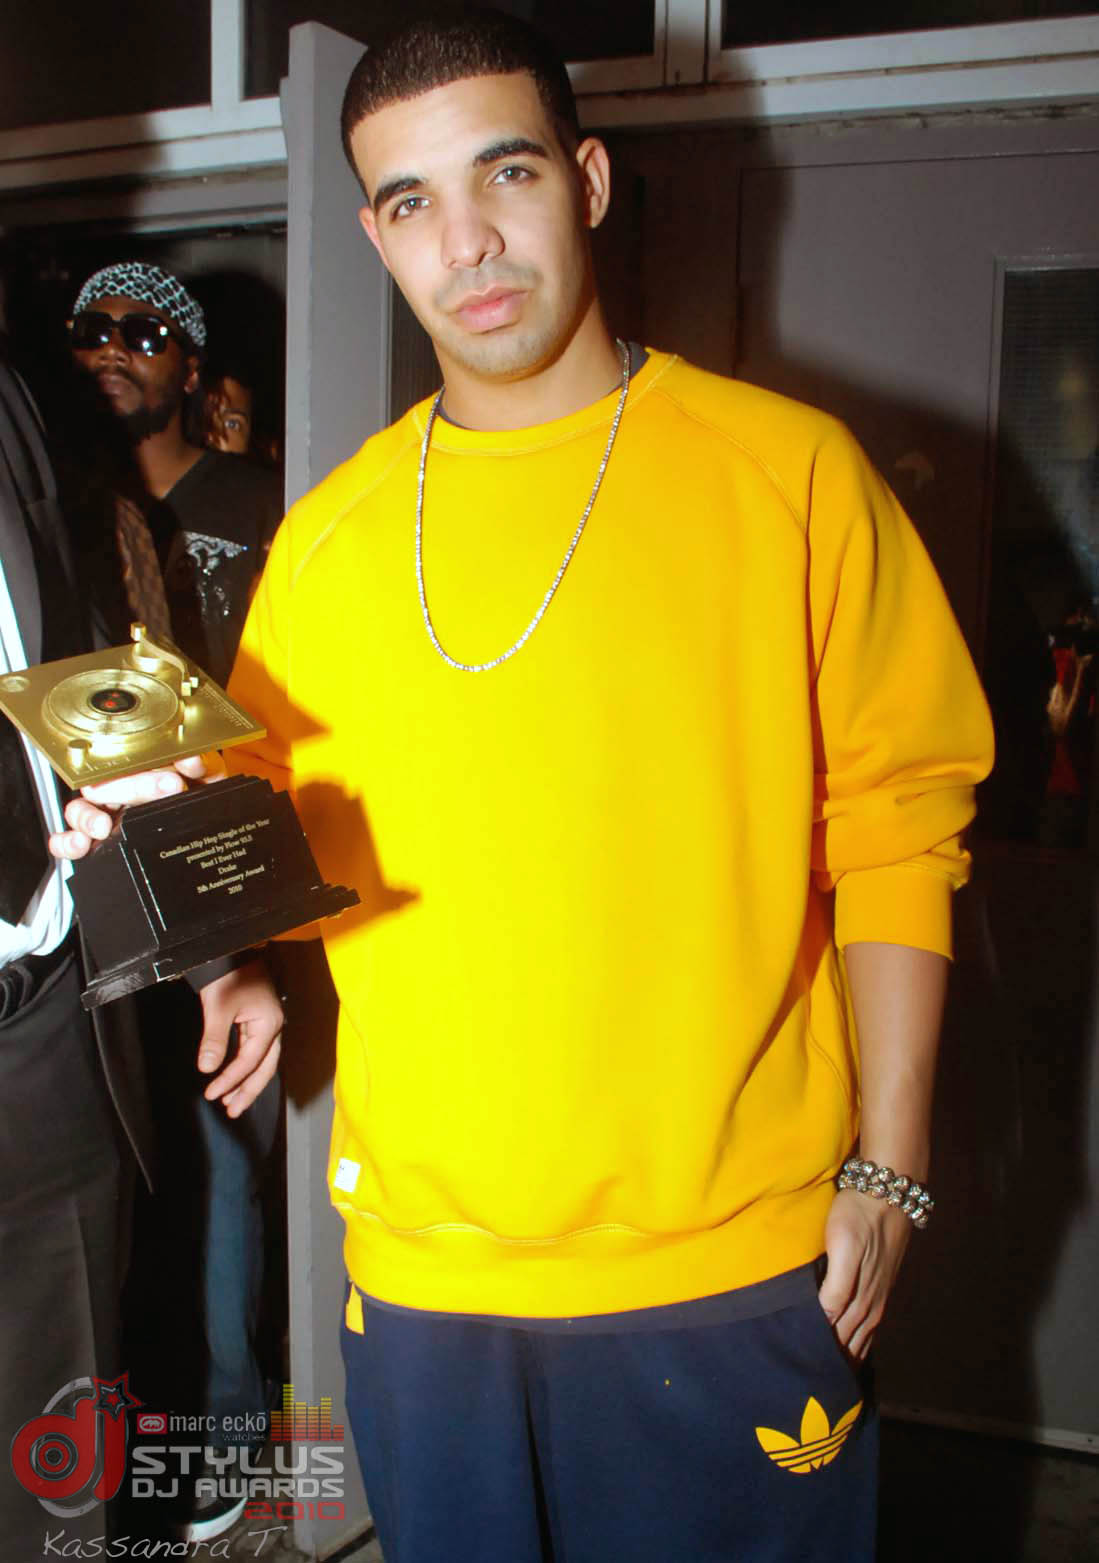 The 2010 Stylus DJ Awards Presented by Marc Ecko Watches